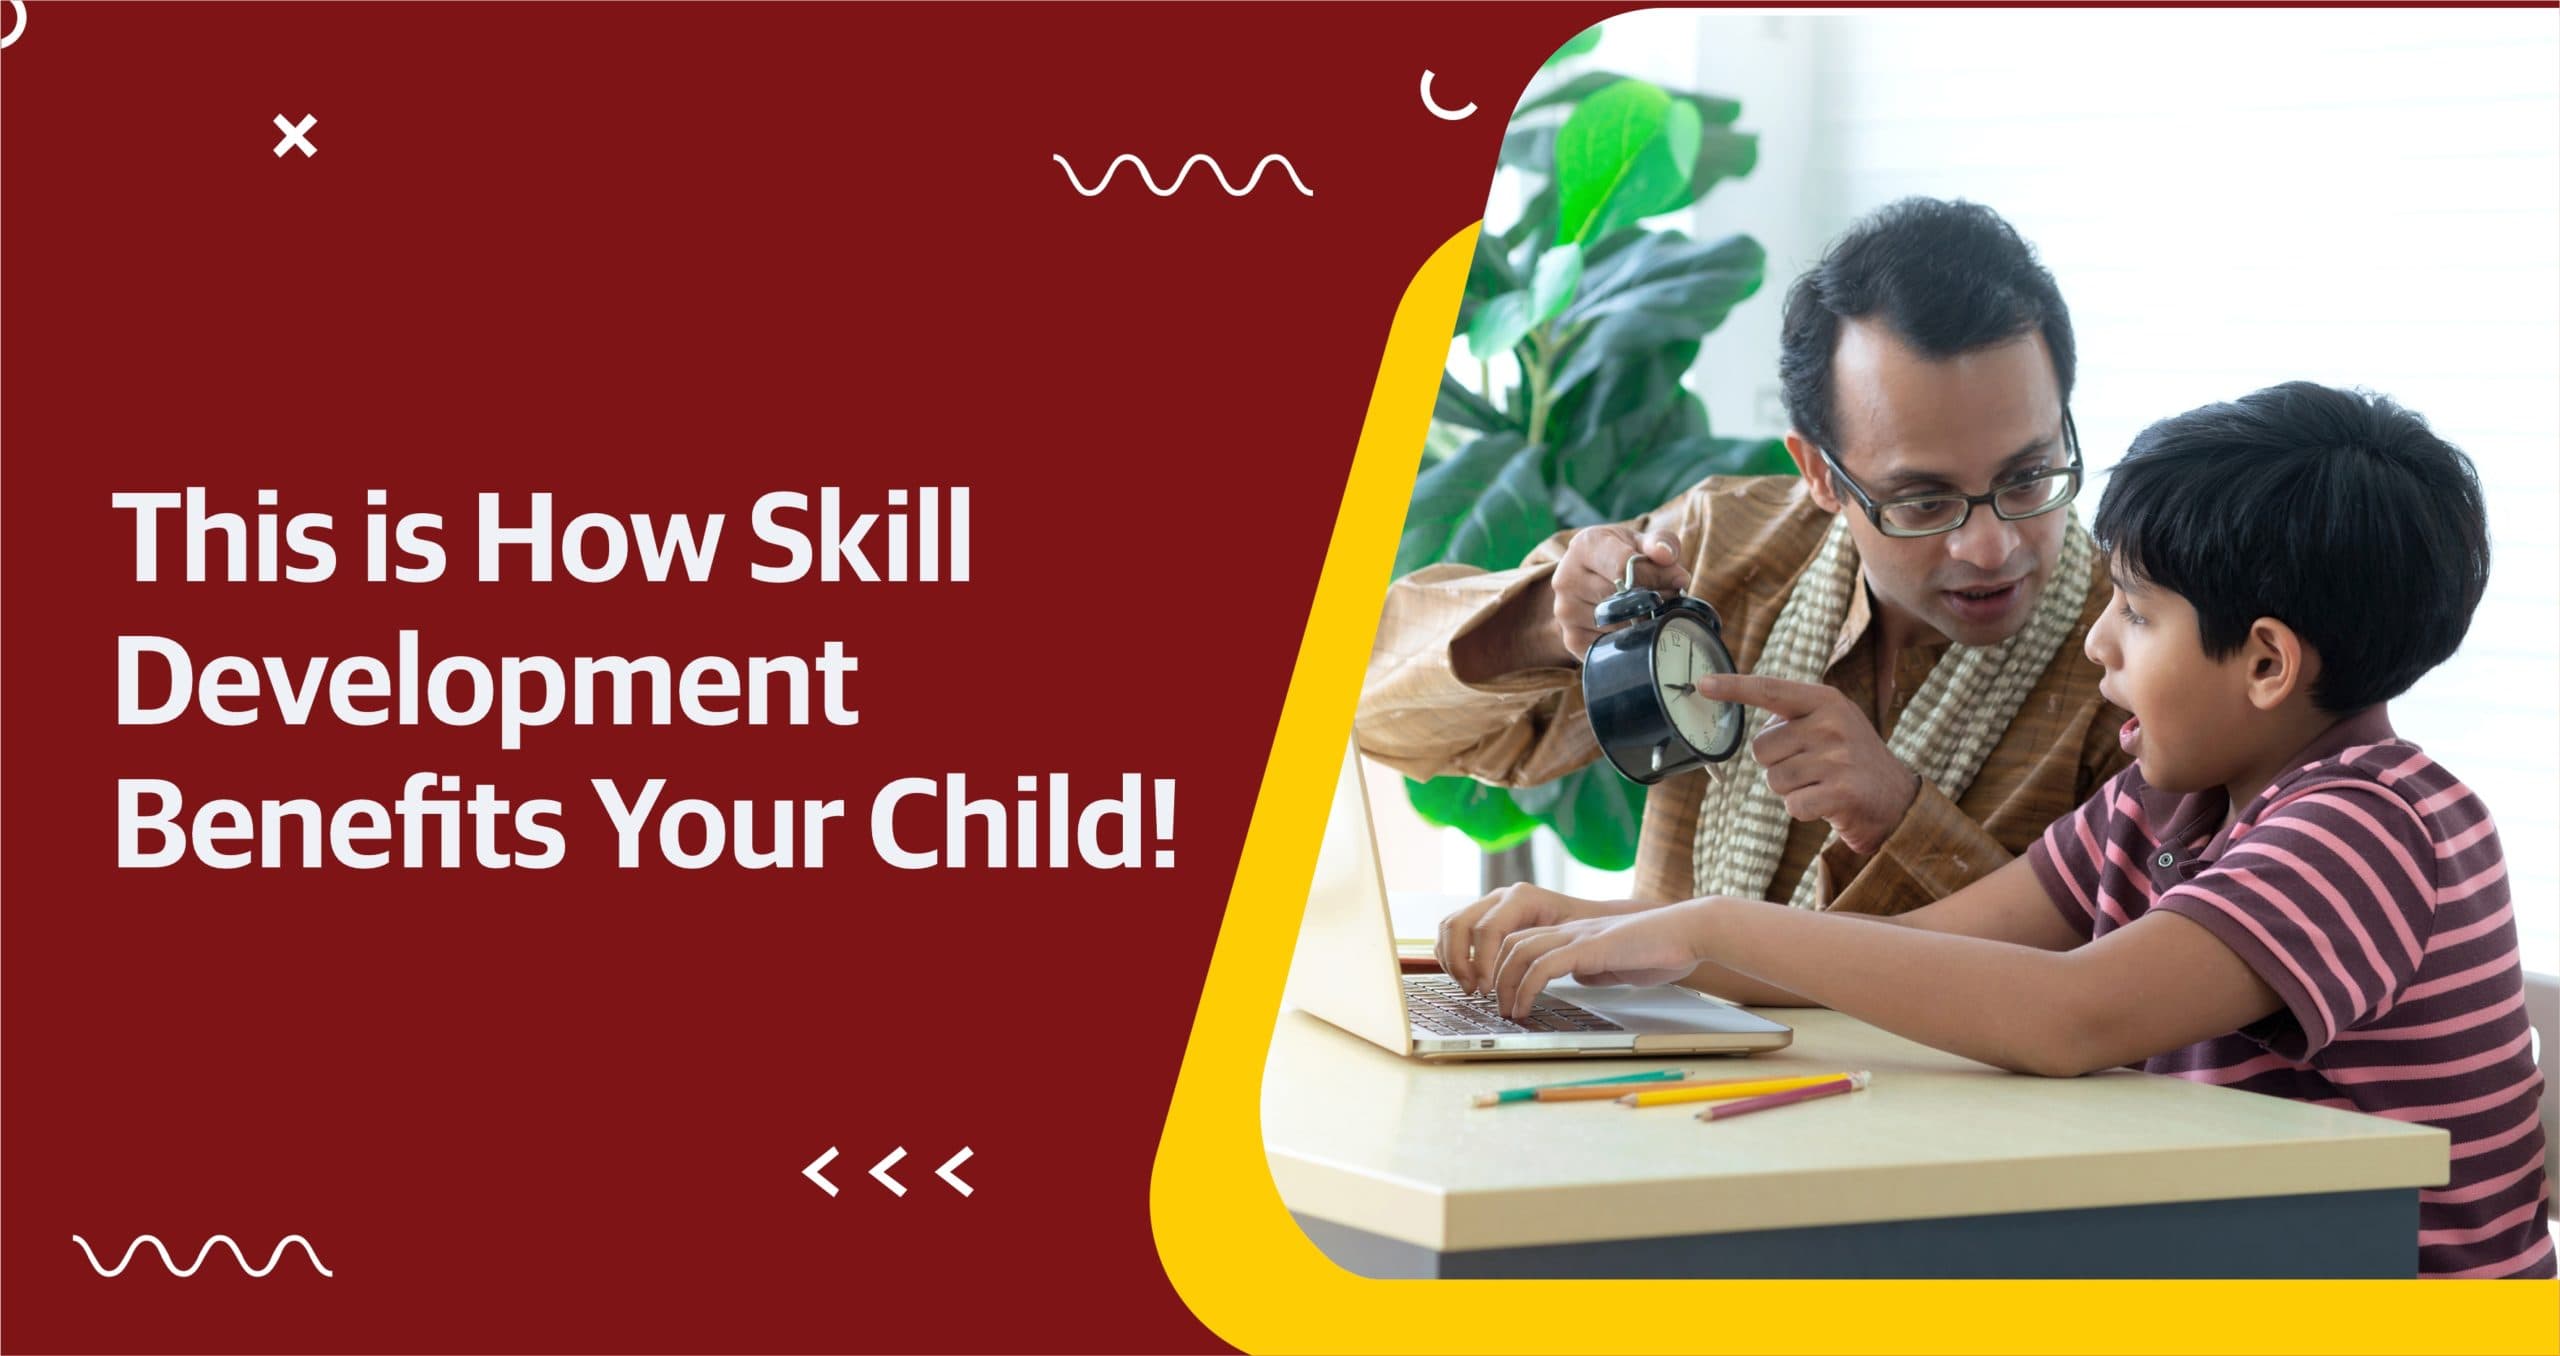 This is How Skill Development Benefits Your Child!